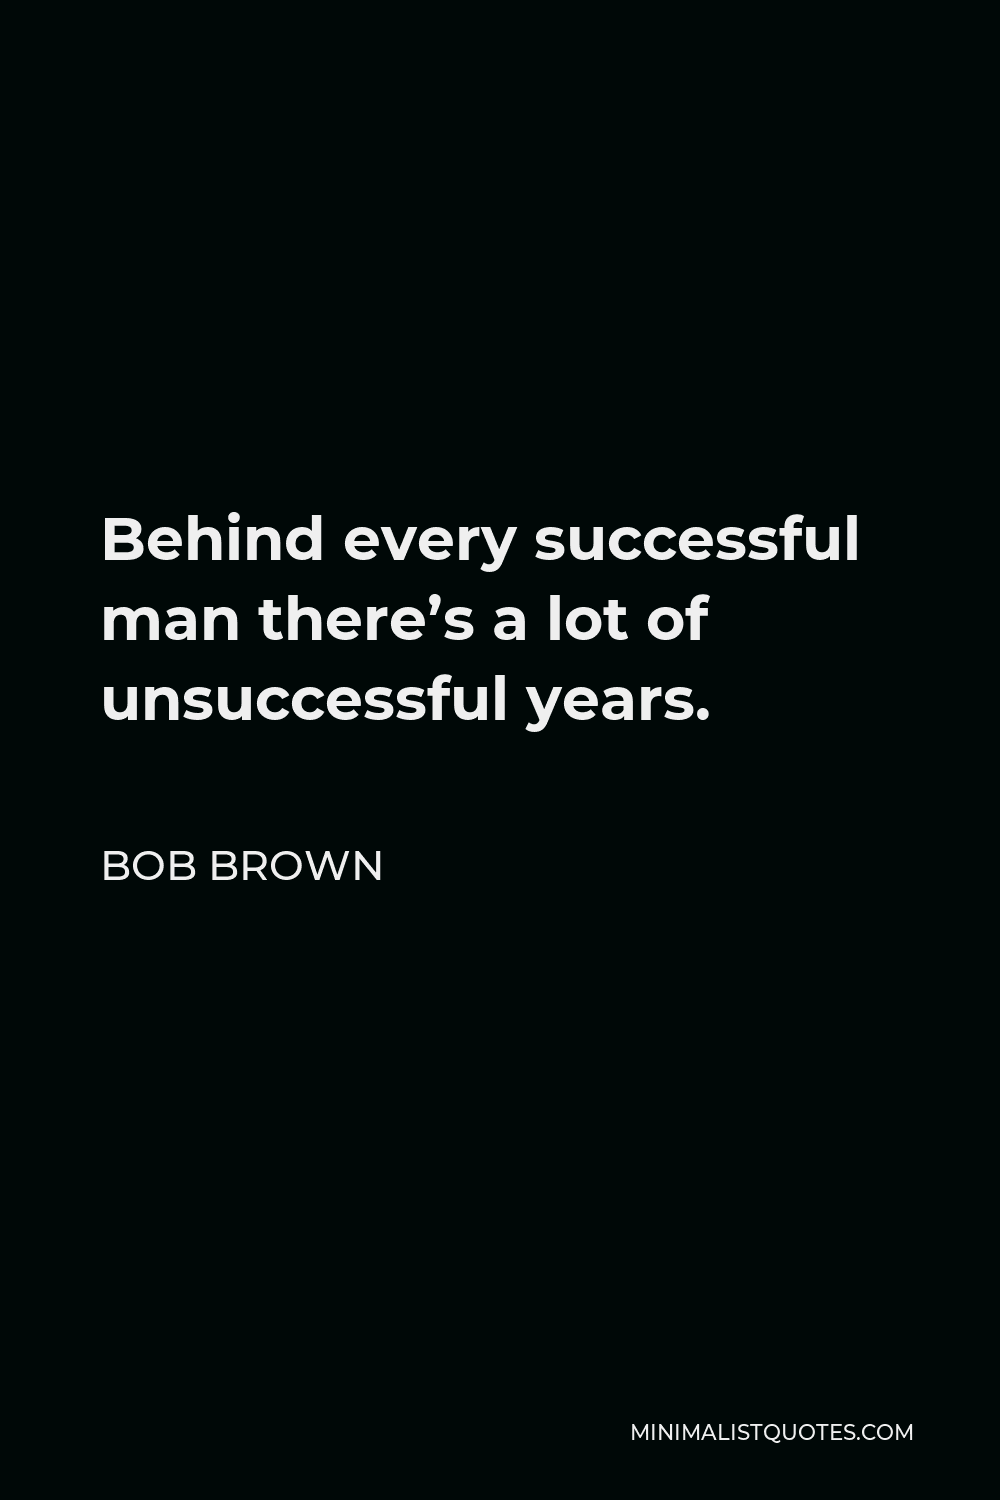 Bob Brown Quote - Behind every successful man there’s a lot of unsuccessful years.